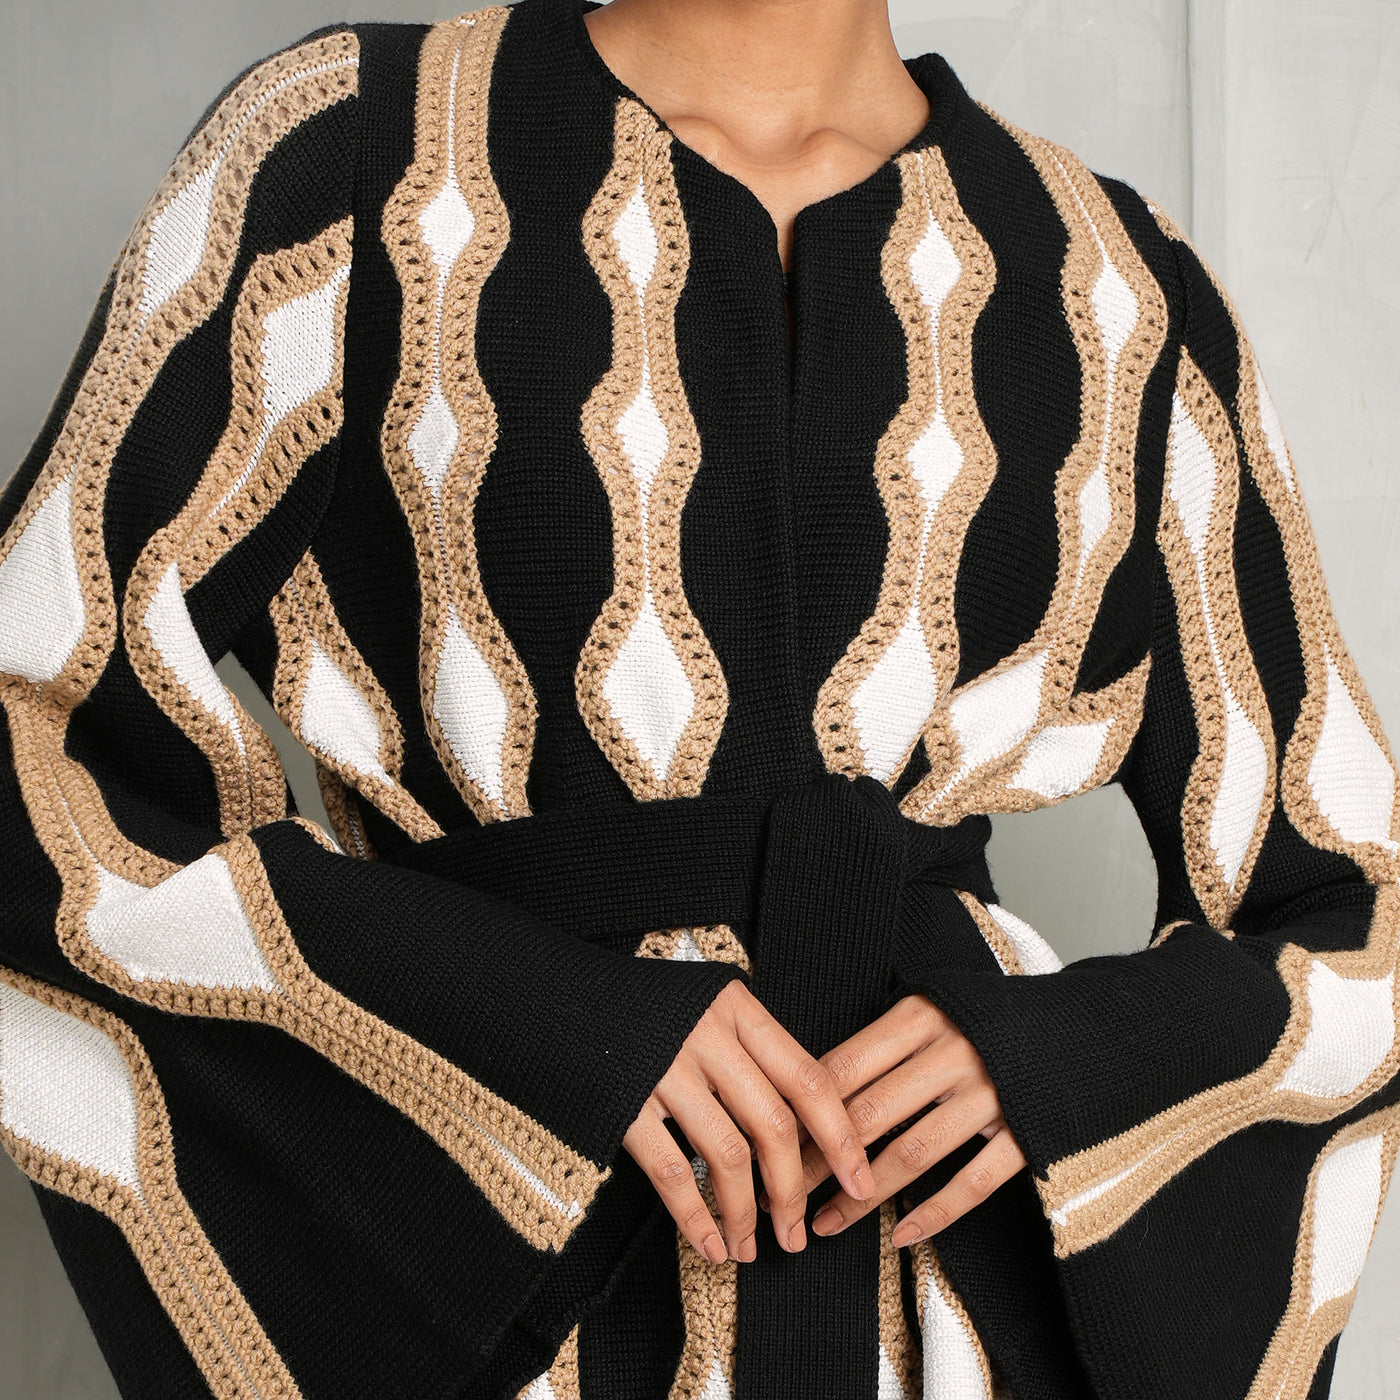 CHLOÉ Black knit beige and white Trumpet Sleeve Sweater